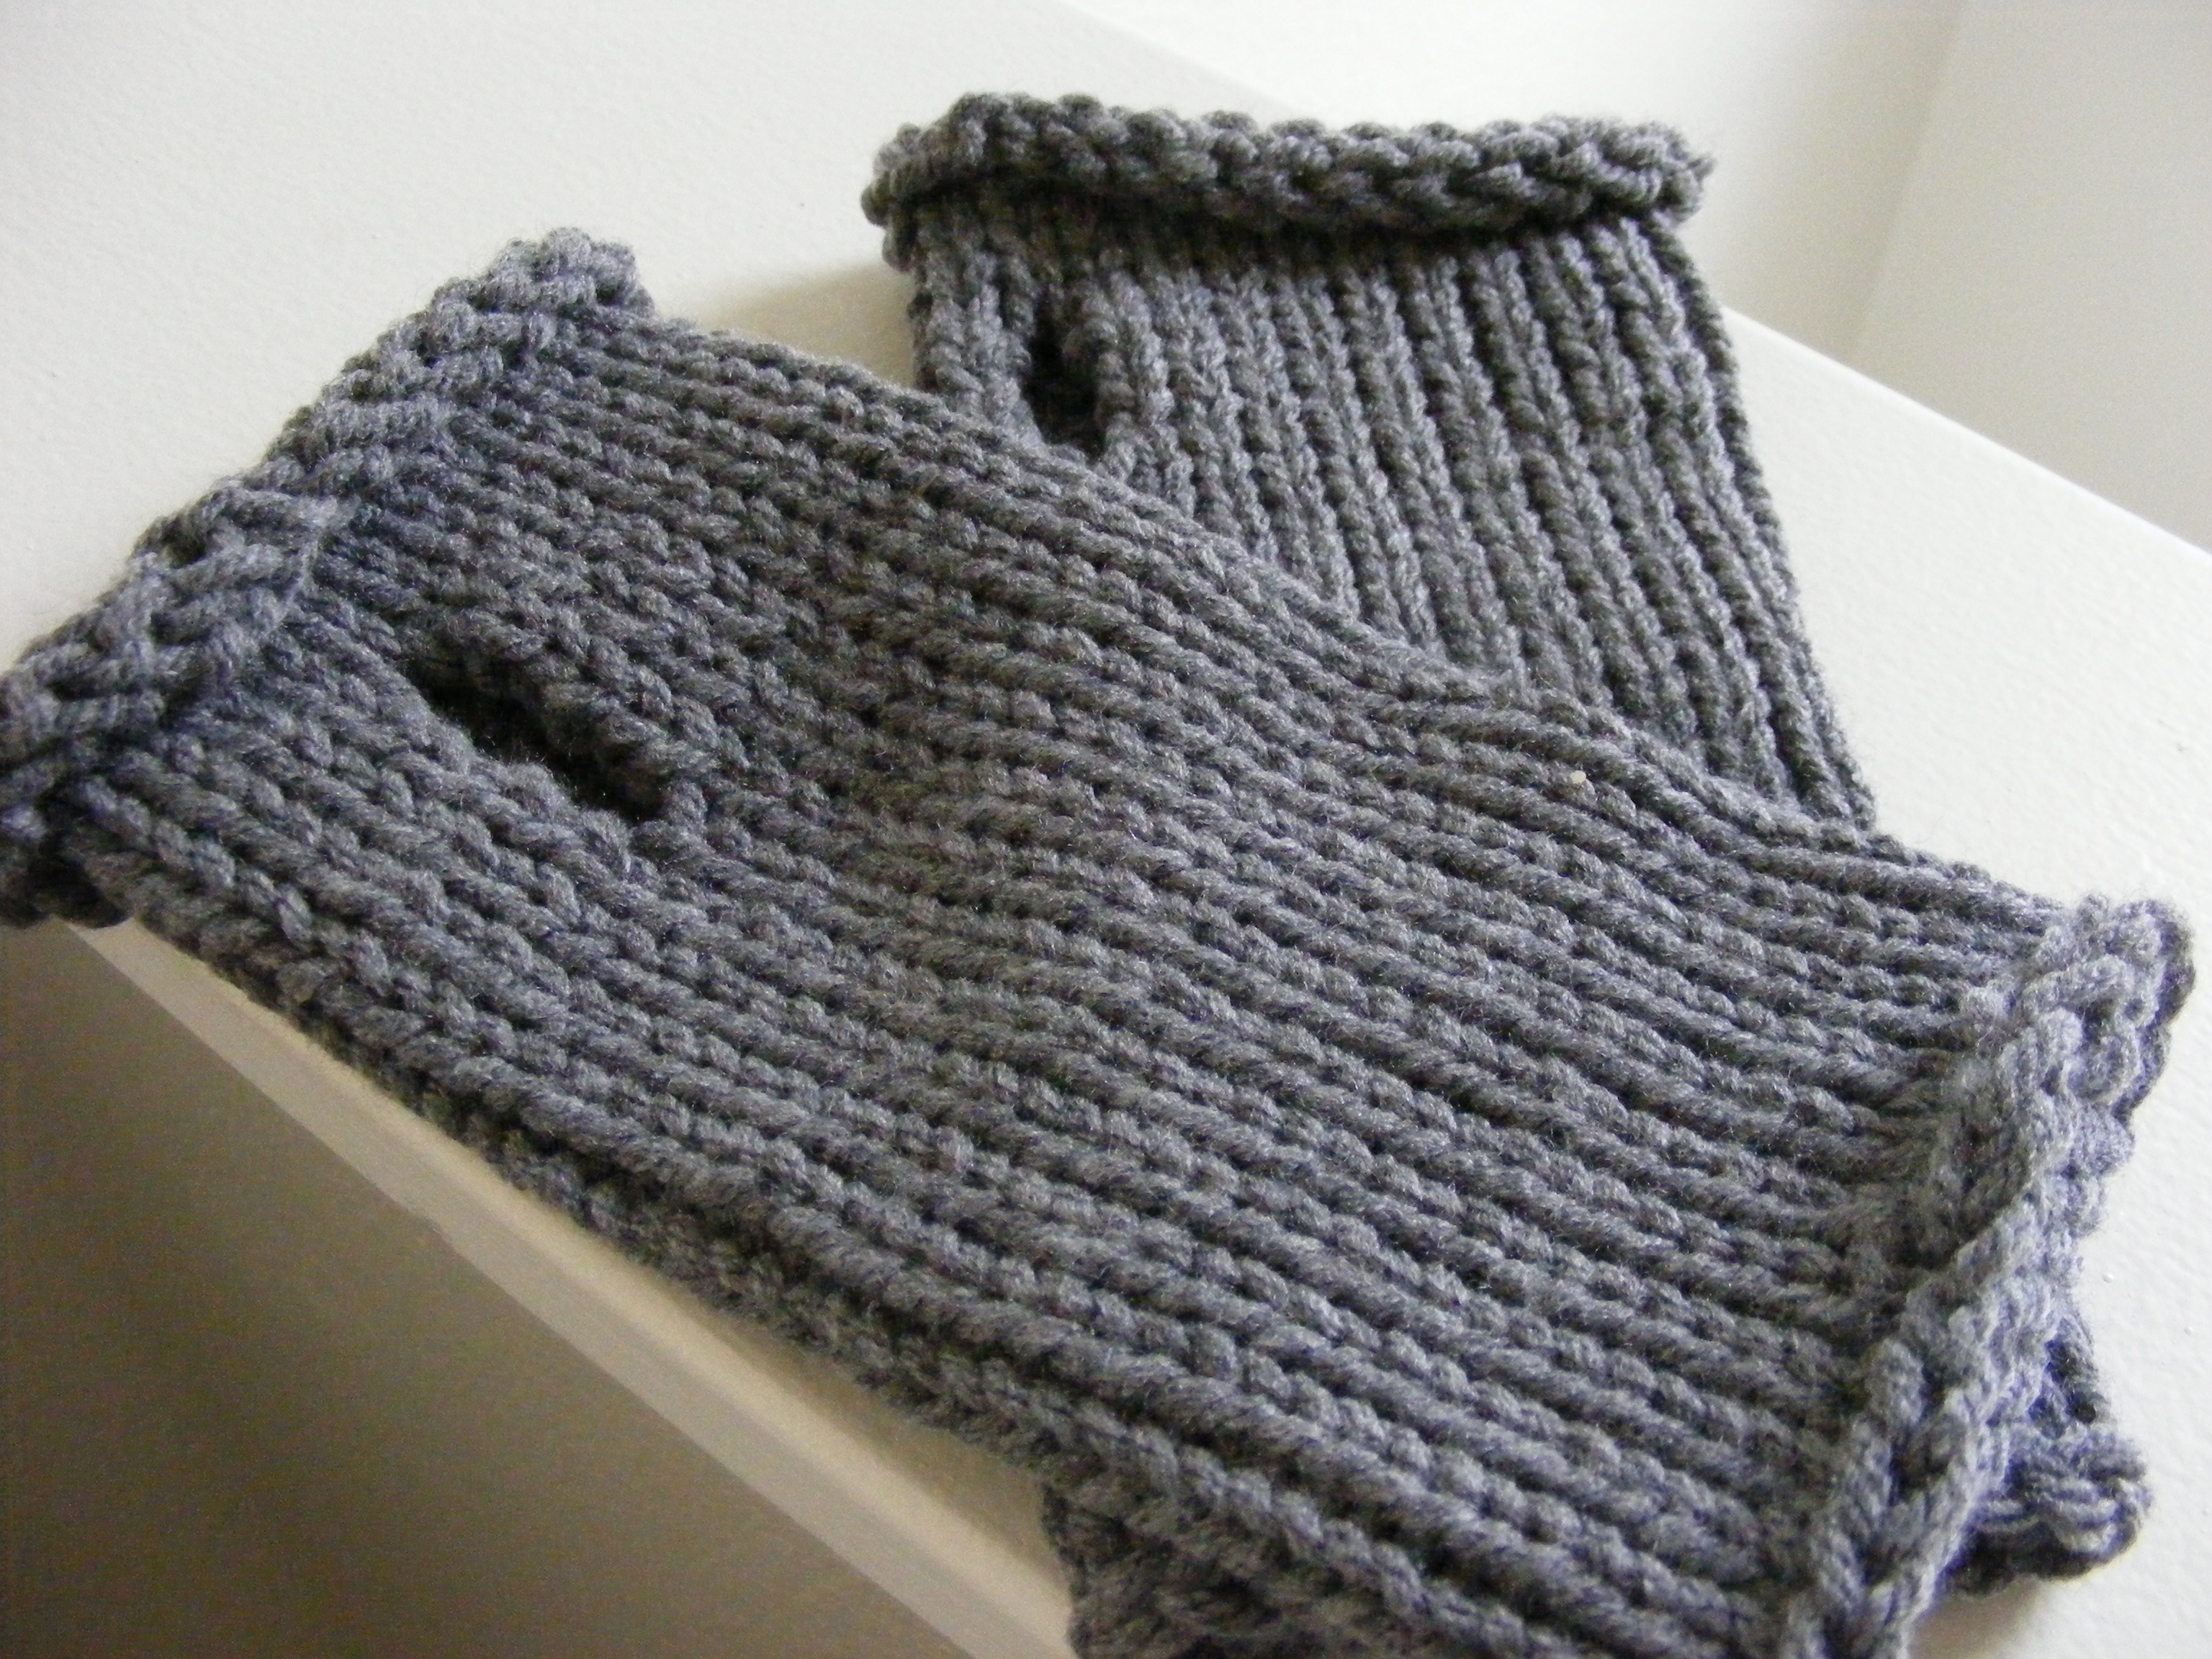 Knitted Wrist Warmer Pattern free from Planet Penny